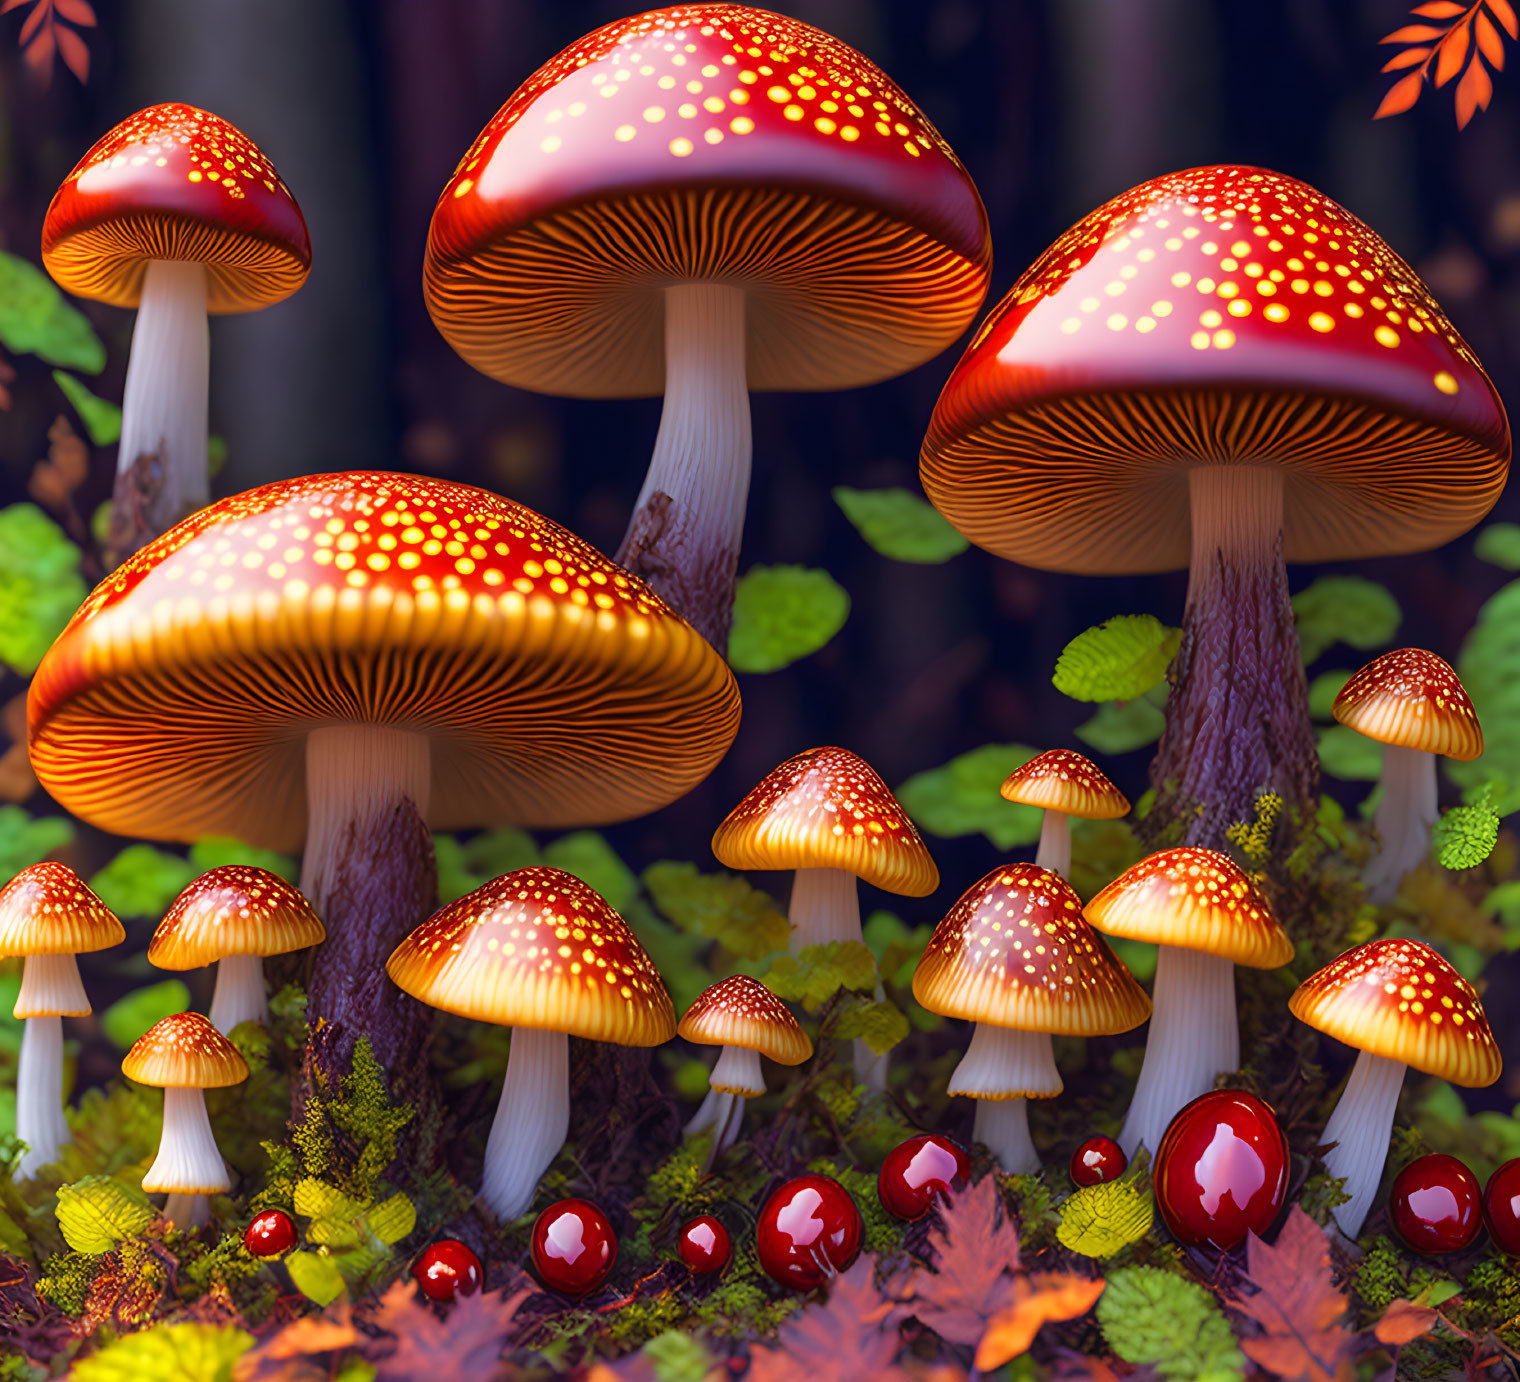 Stunning Beauty of the Deadly Fly Agaric Mushroom 